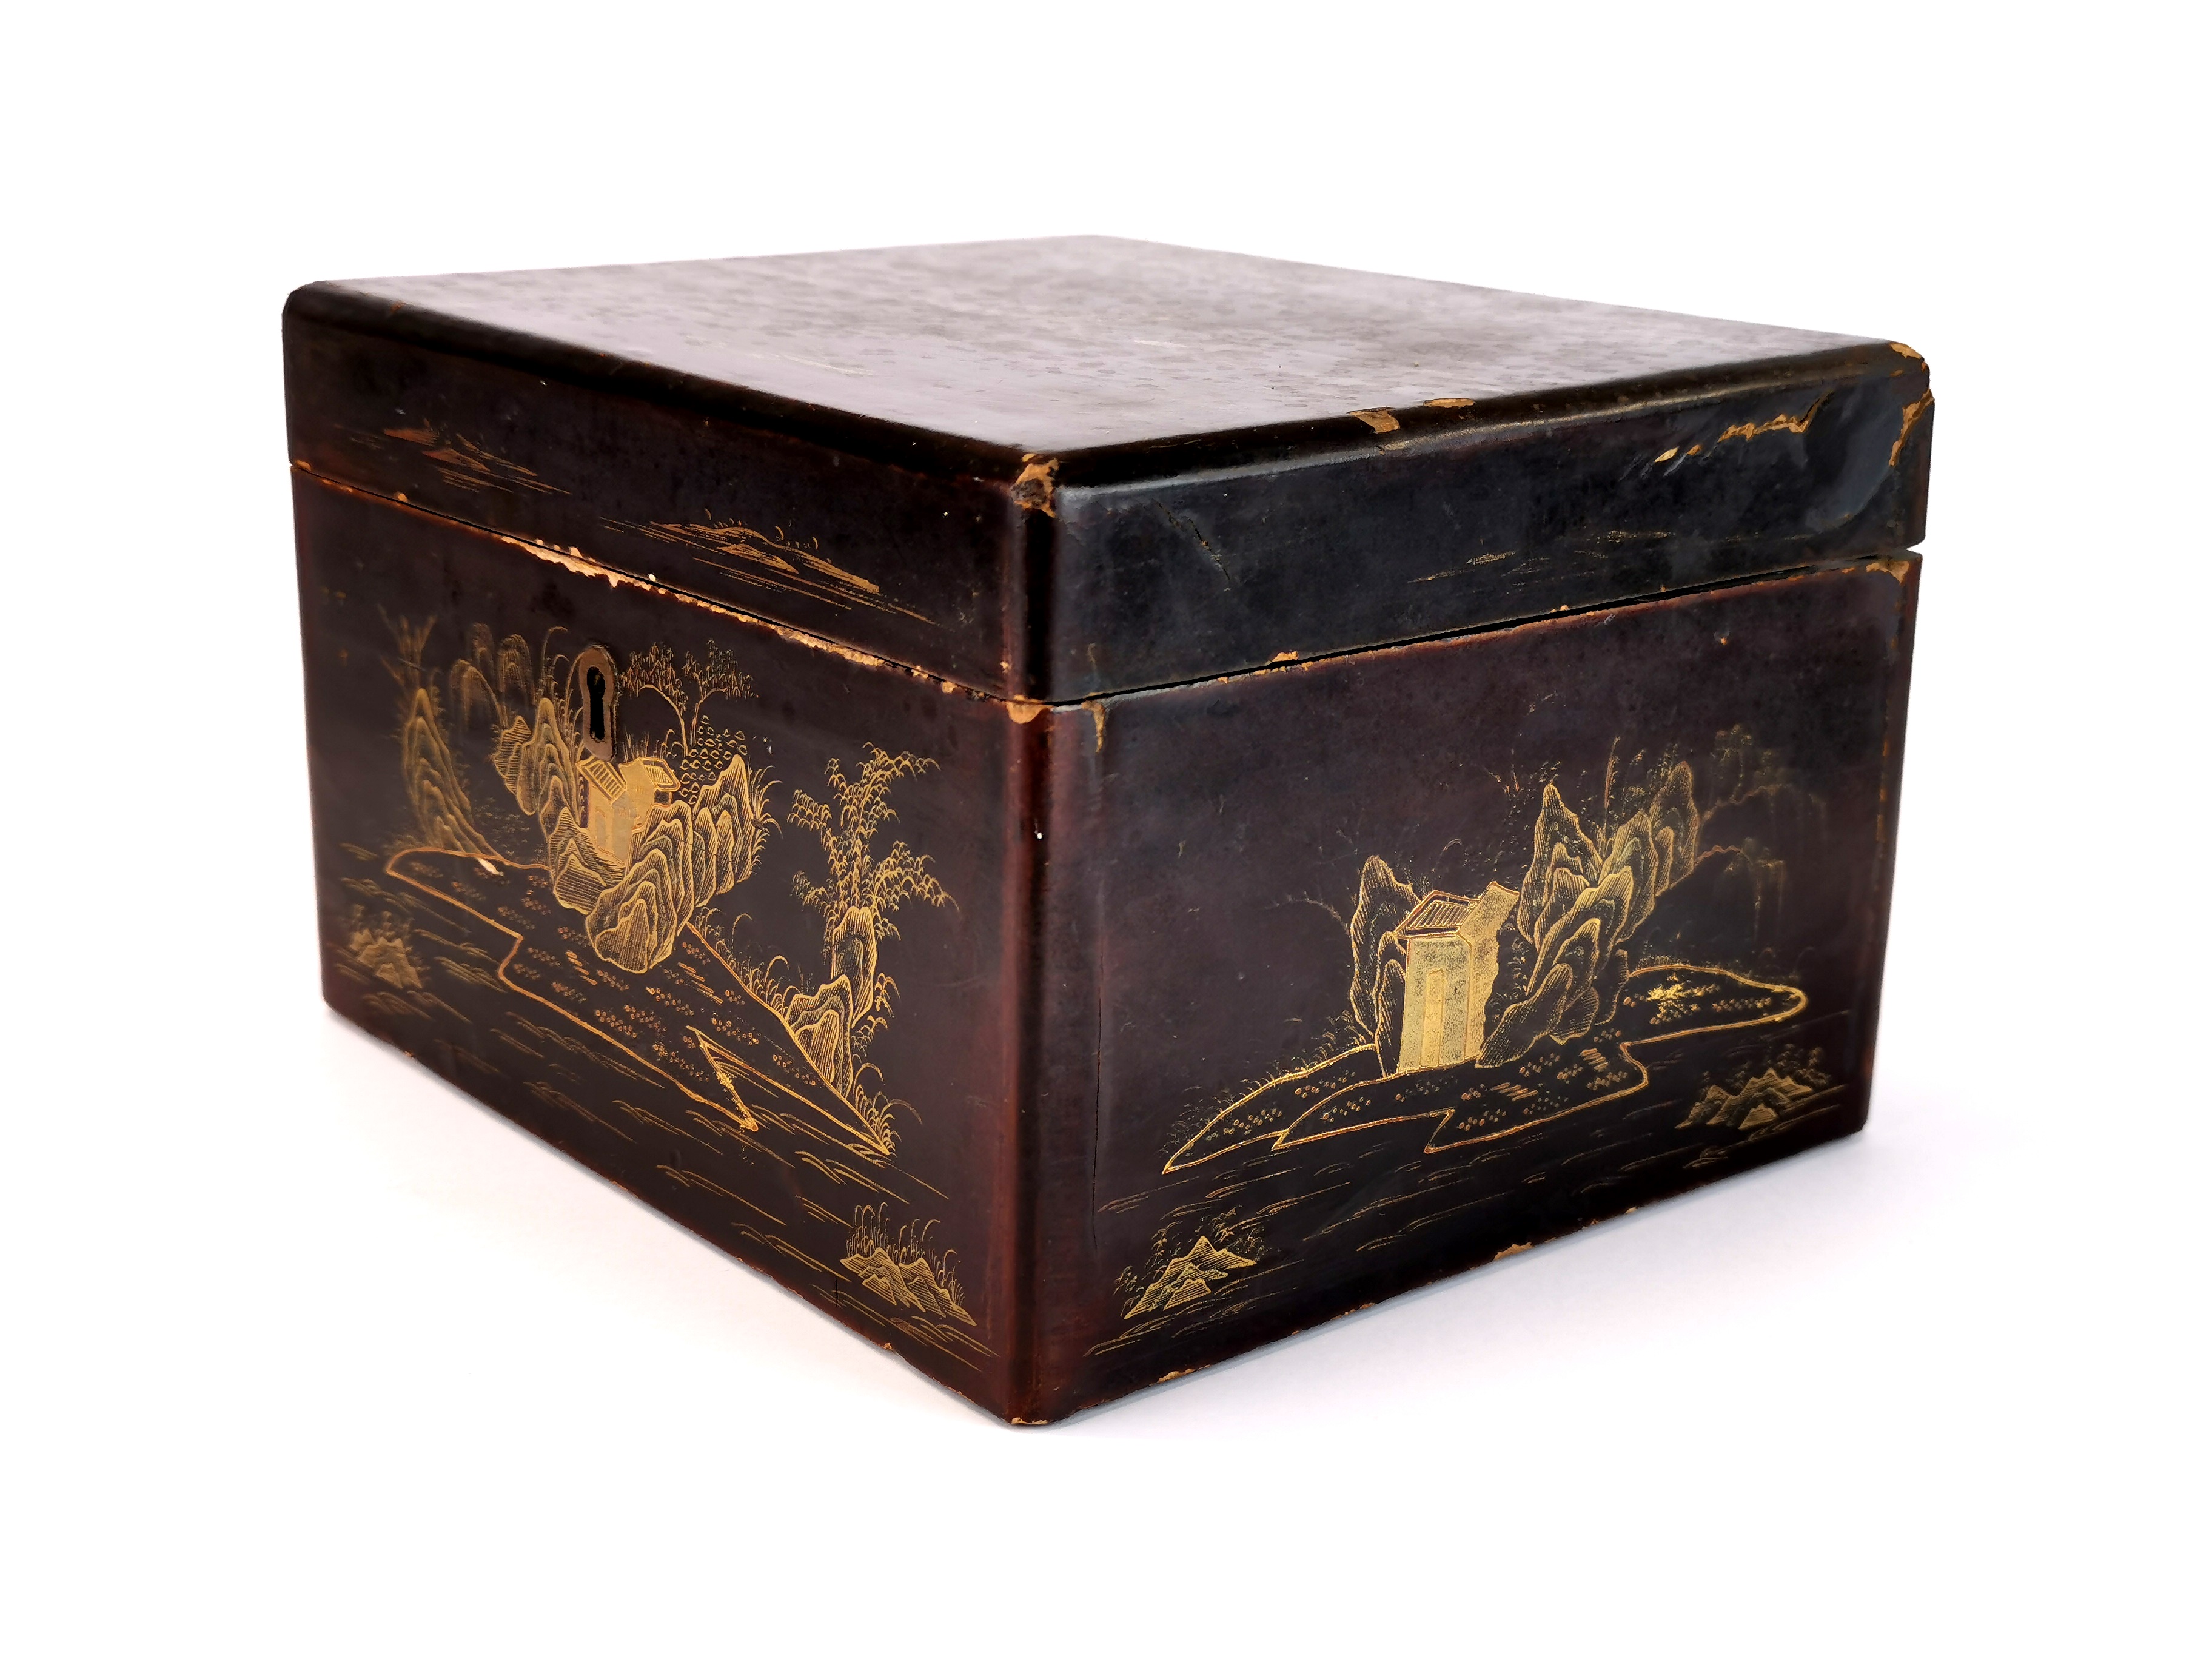 A 19th century Chinese lacquered wood and pewter tea box, 21 x 17 x 13cm. - Image 2 of 4